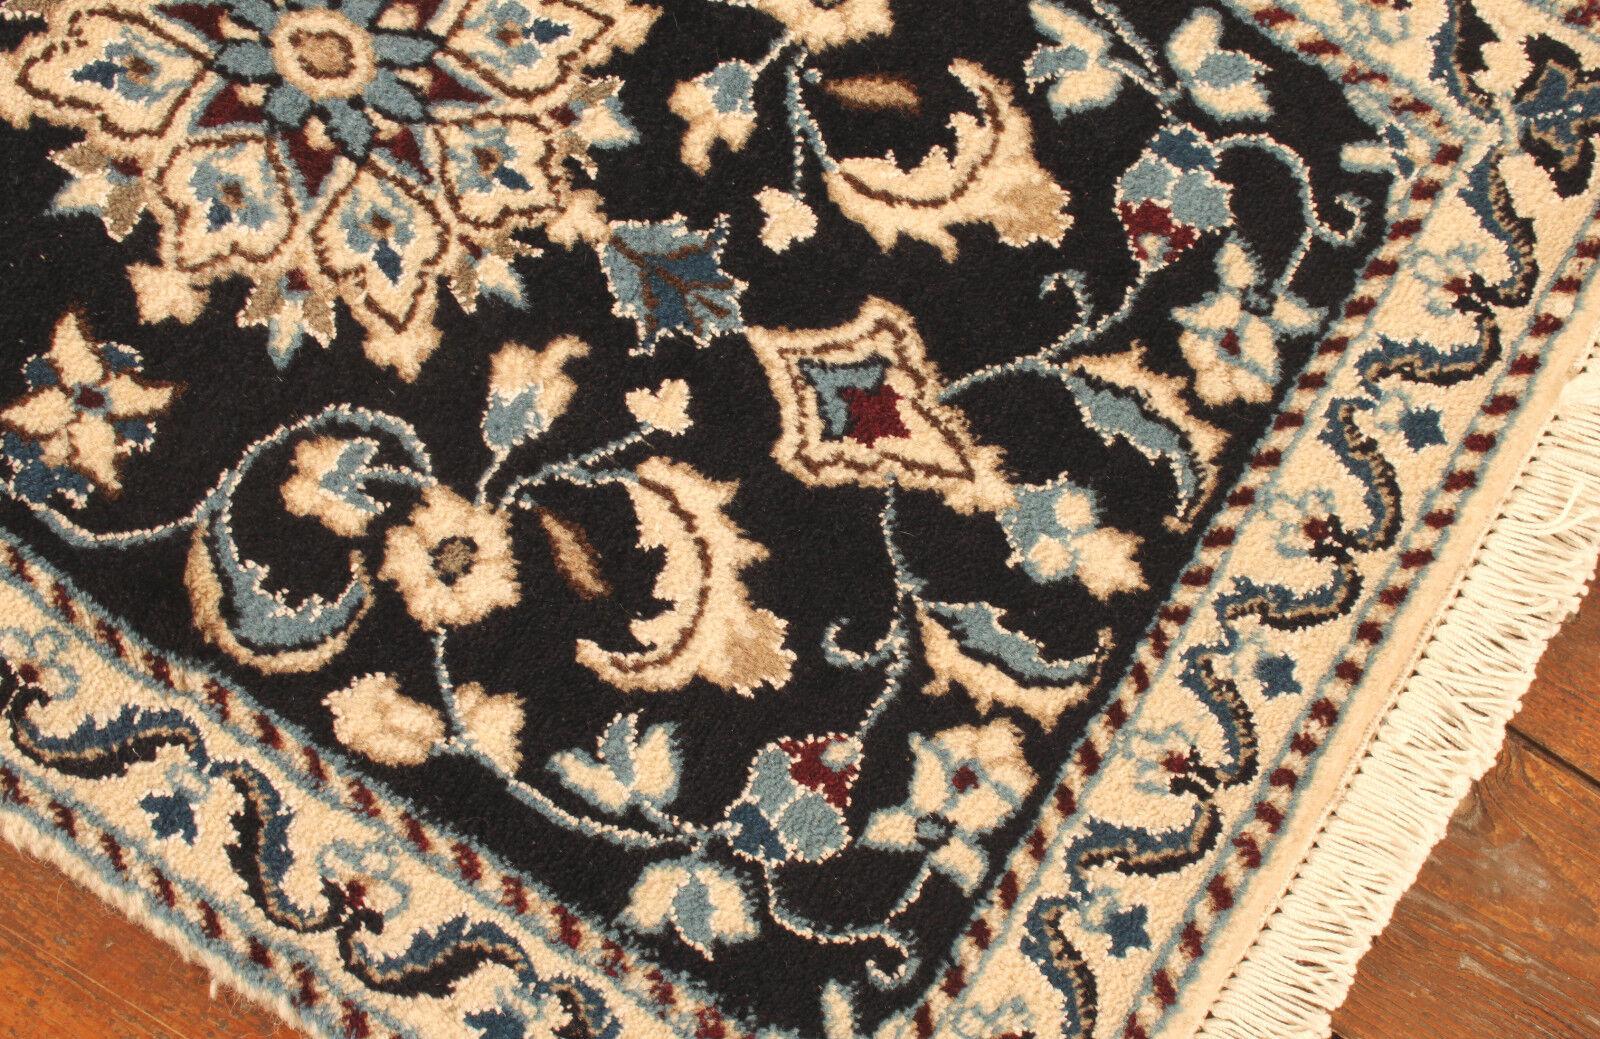 Handmade Vintage Persian Style Nain Rug 1.9' x 2.9', 1980s - 1T49 In Good Condition For Sale In Bordeaux, FR